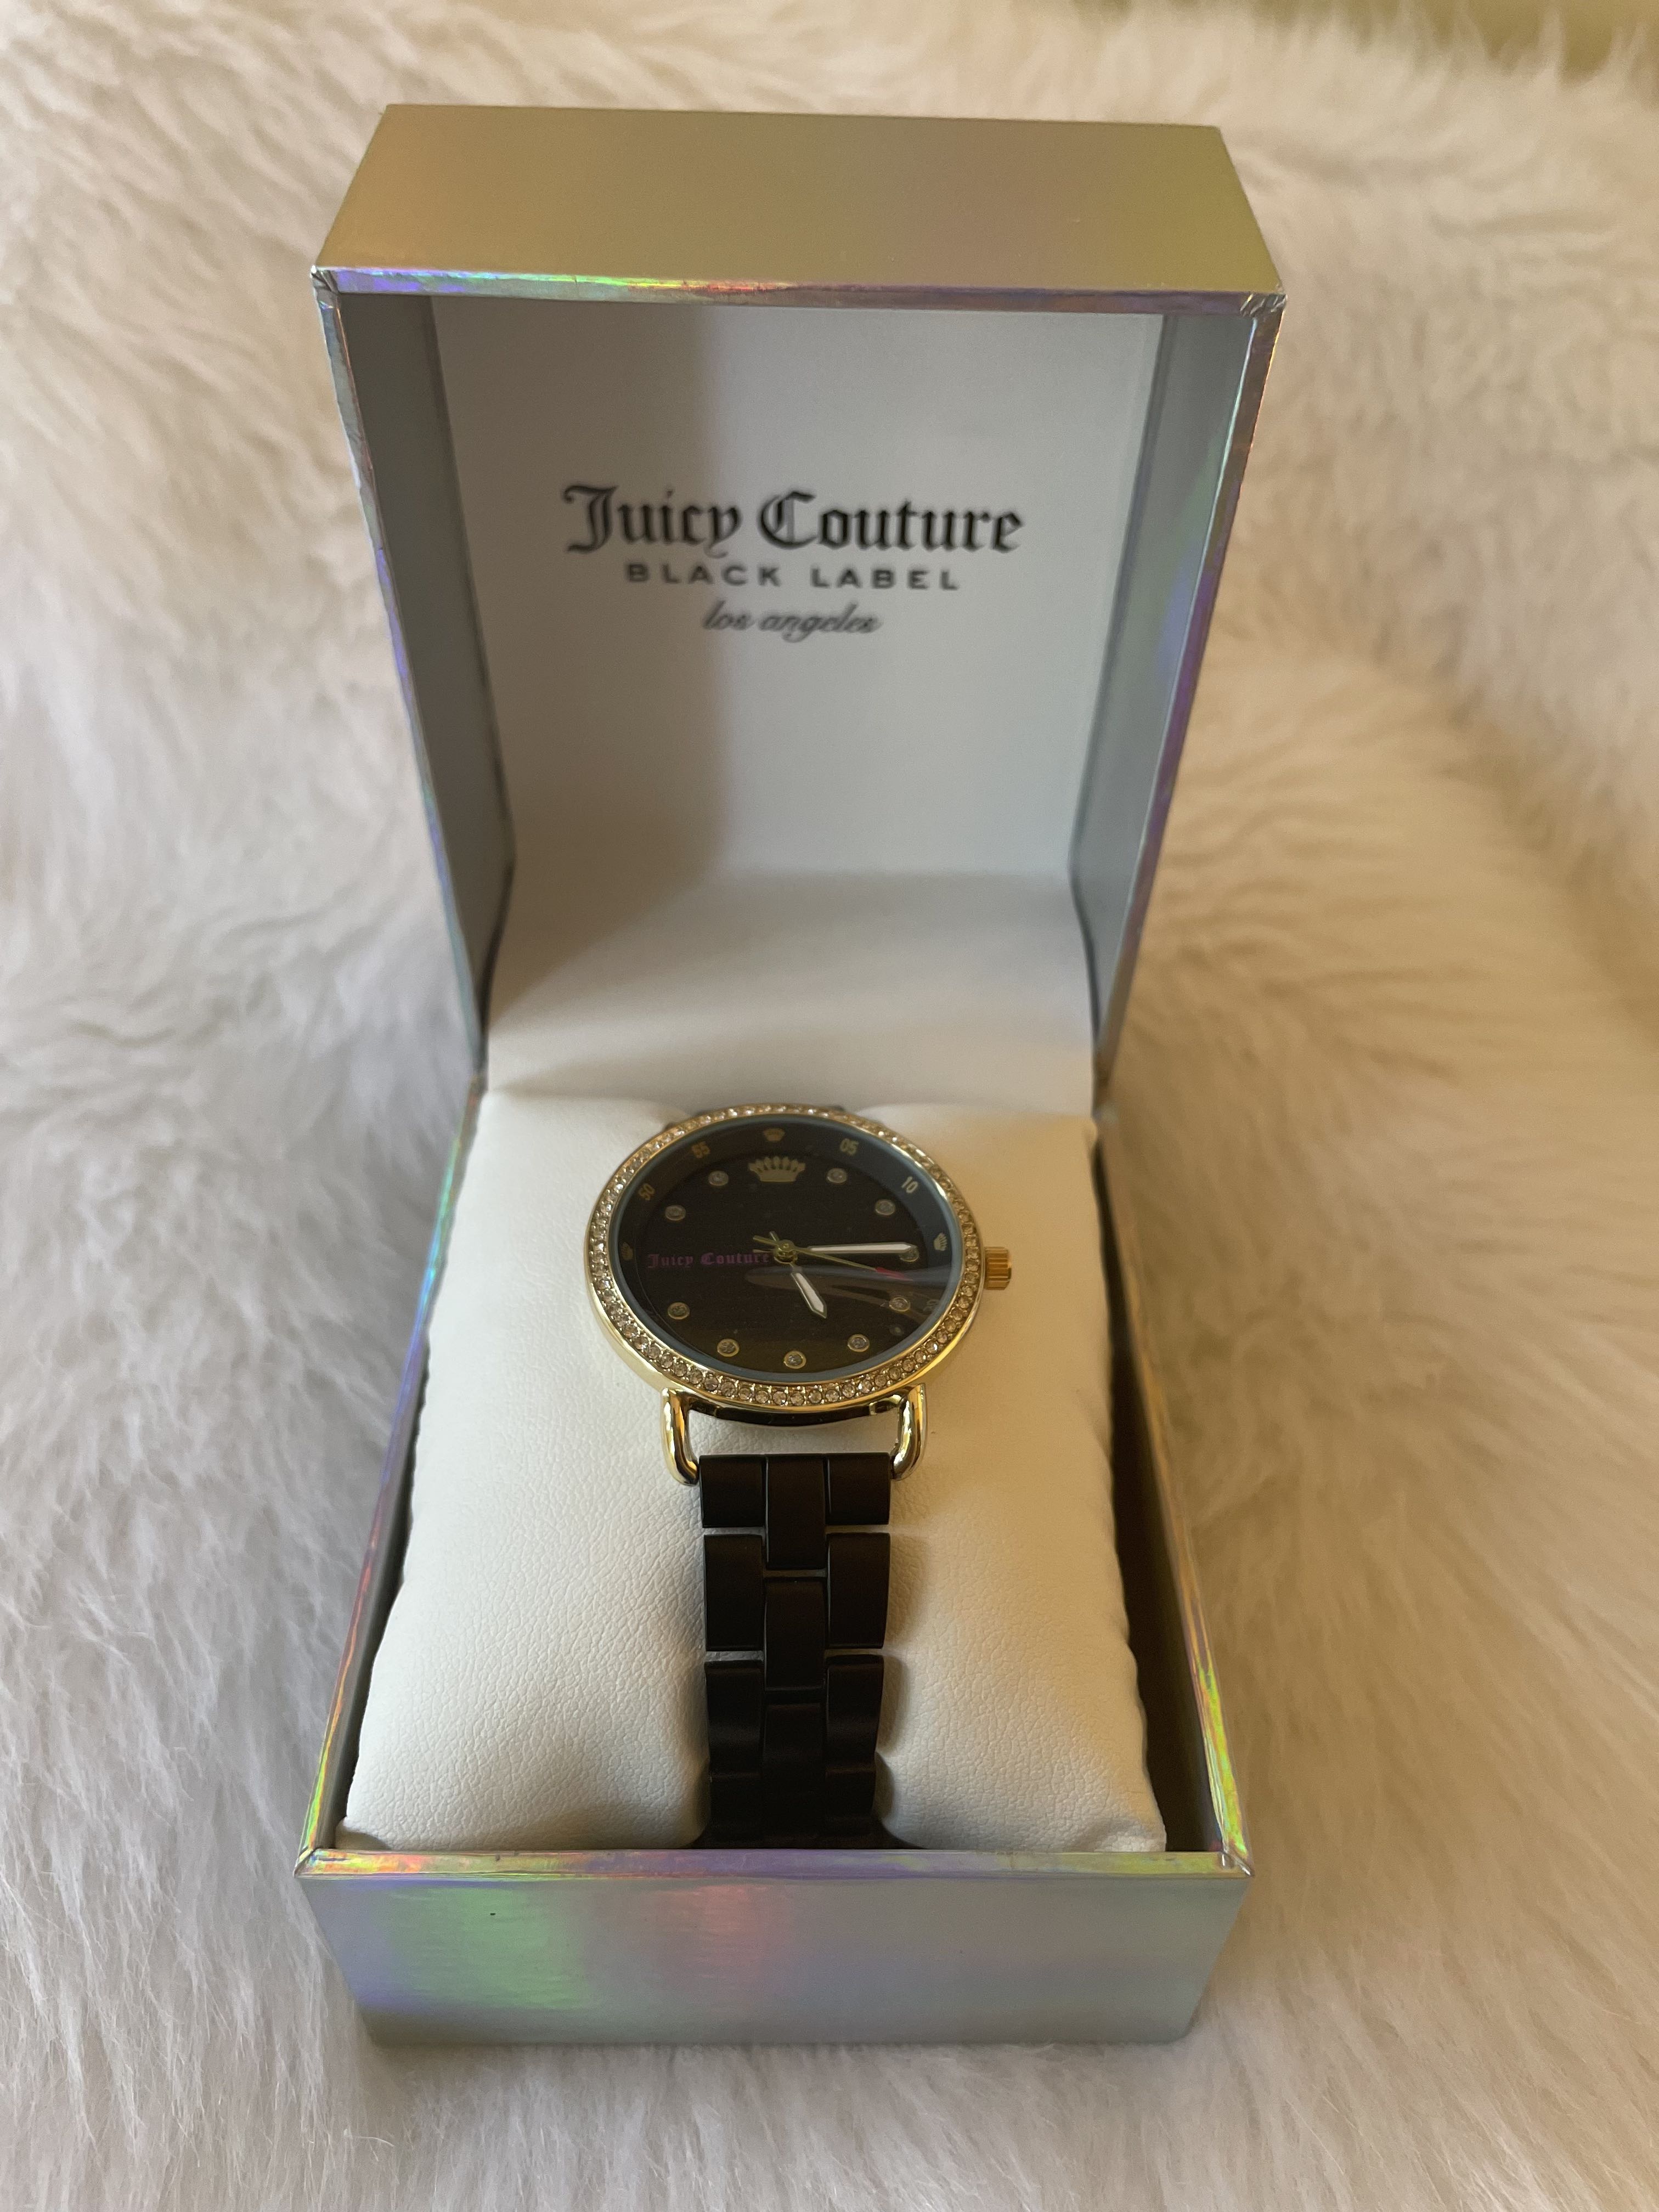 Juicy Couture Black Label Watch Los Angeles Outlet | head.hesge.ch